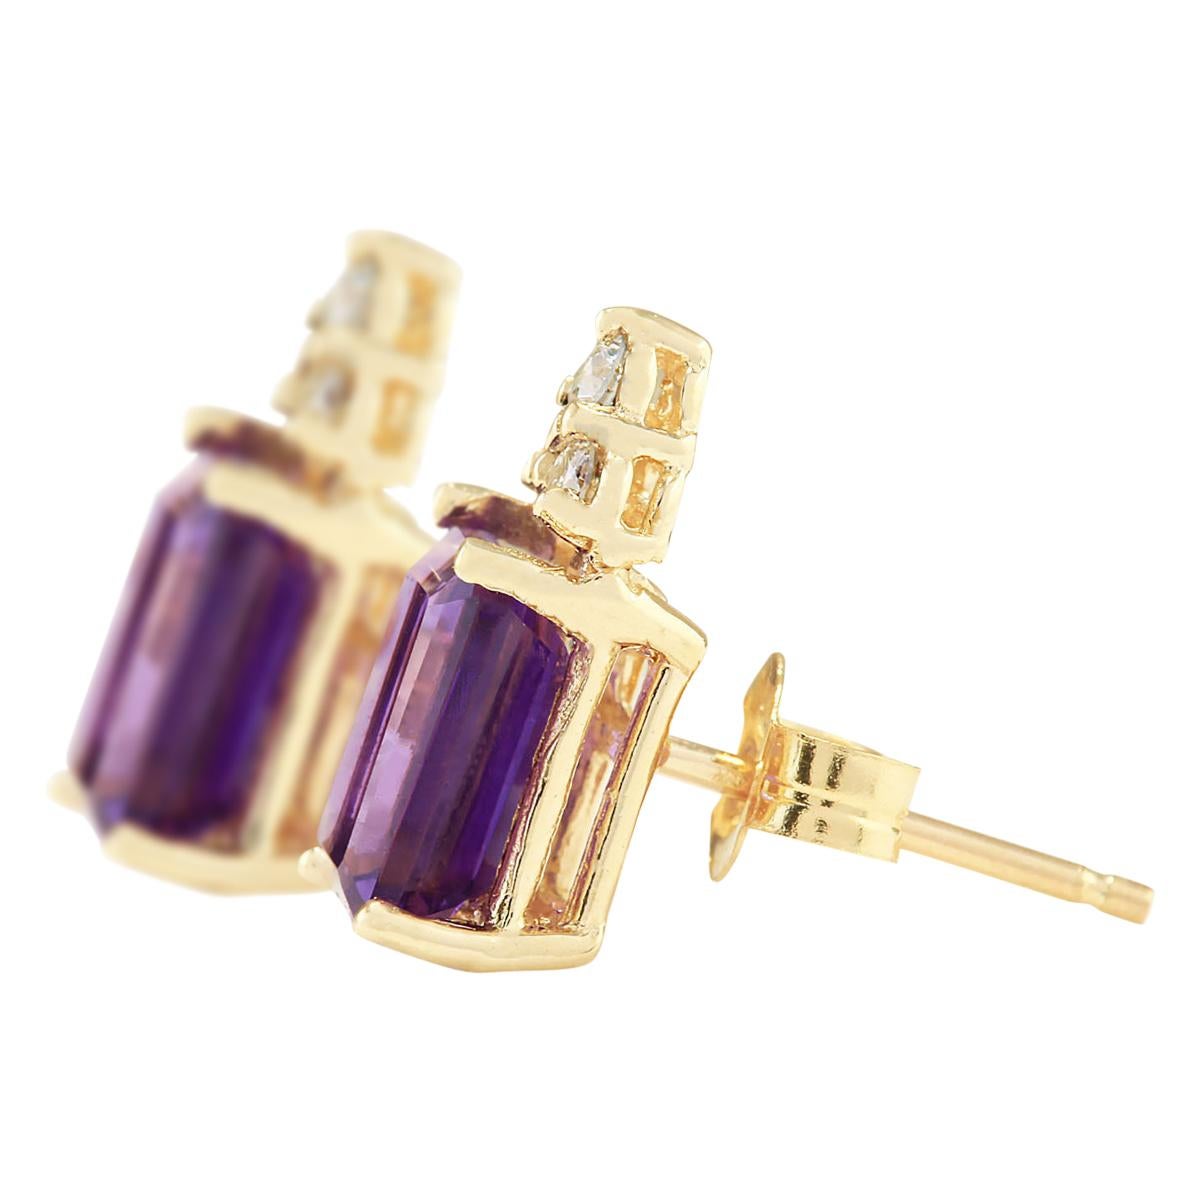 2.66 Carat Natural Amethyst 14 Karat Yellow Gold Diamond Earrings
Stamped: 14K Yellow Gold
Total Earrings Weight: 1.2 Grams
Total Natural Amethyst Weight is 2.50 Carat (Measures: 7.00x5.00 mm)
Color: Purple
Total Natural Diamond Weight is 0.16